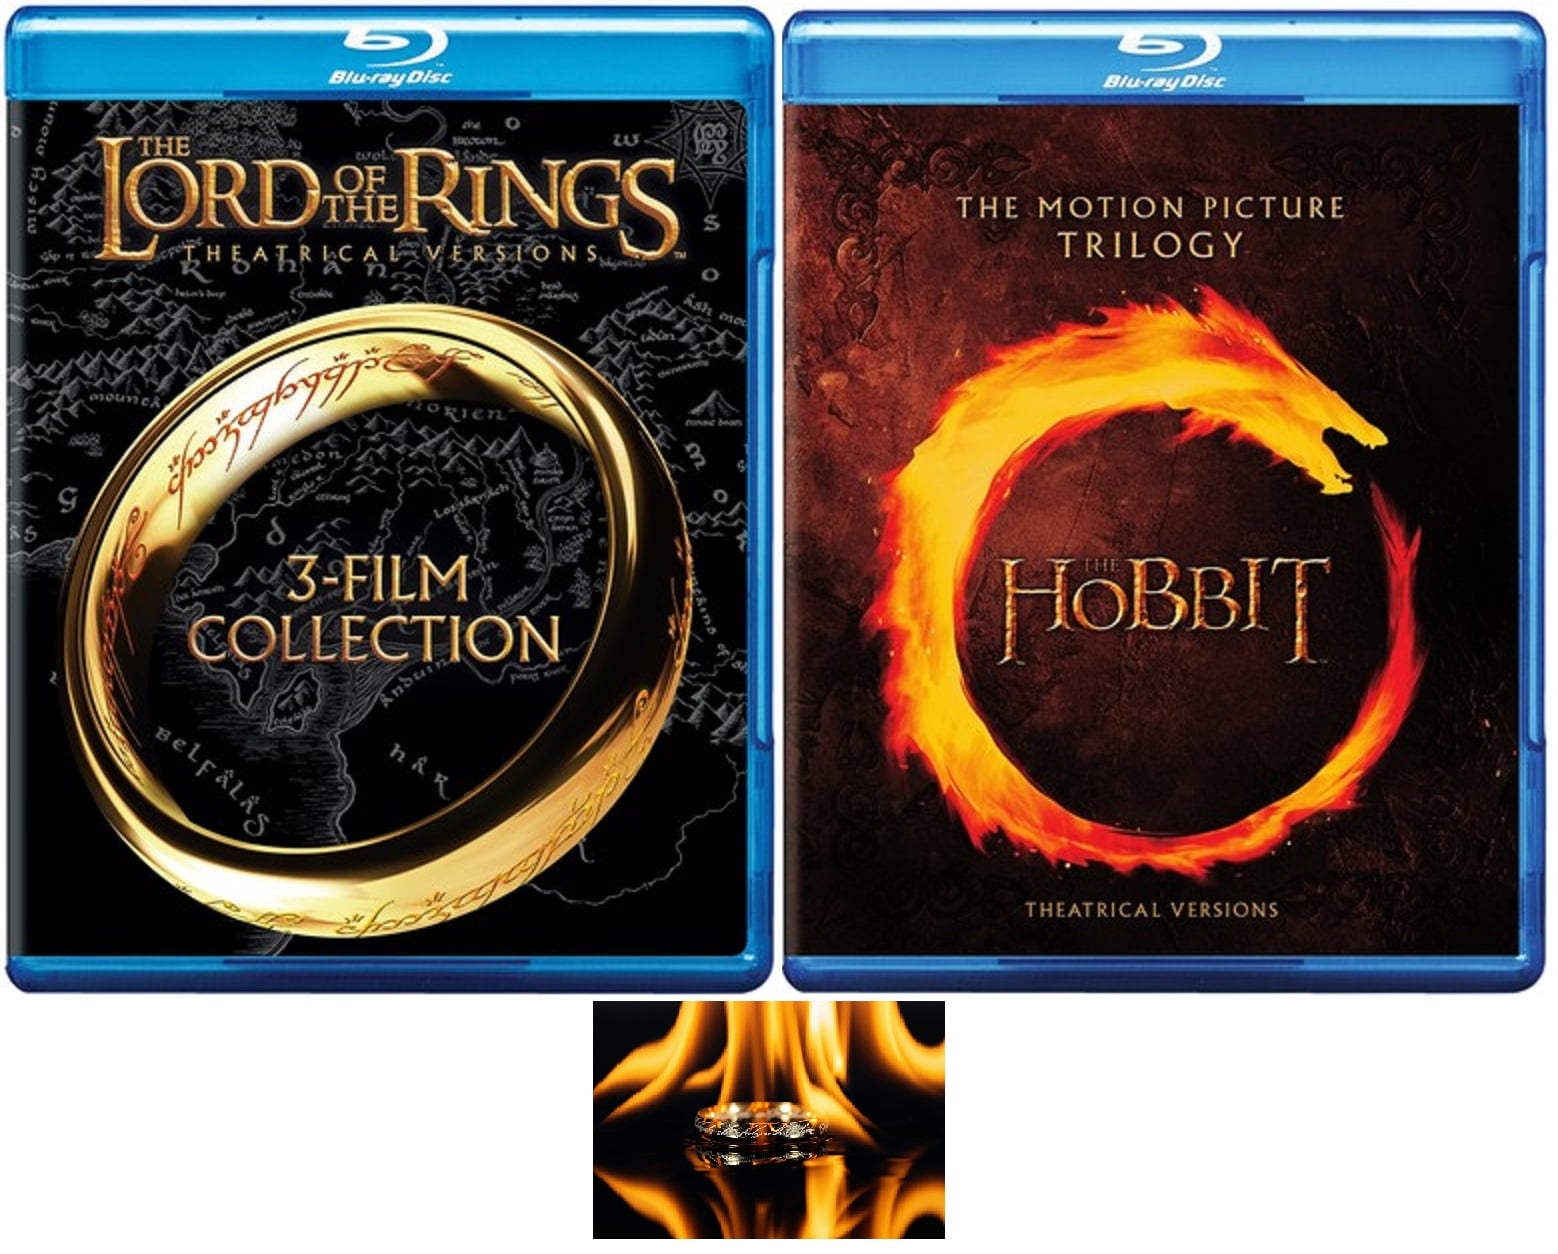 The Lord of the Rings: Theatrical Versions: 3-Film Collection (Blu-ray) 